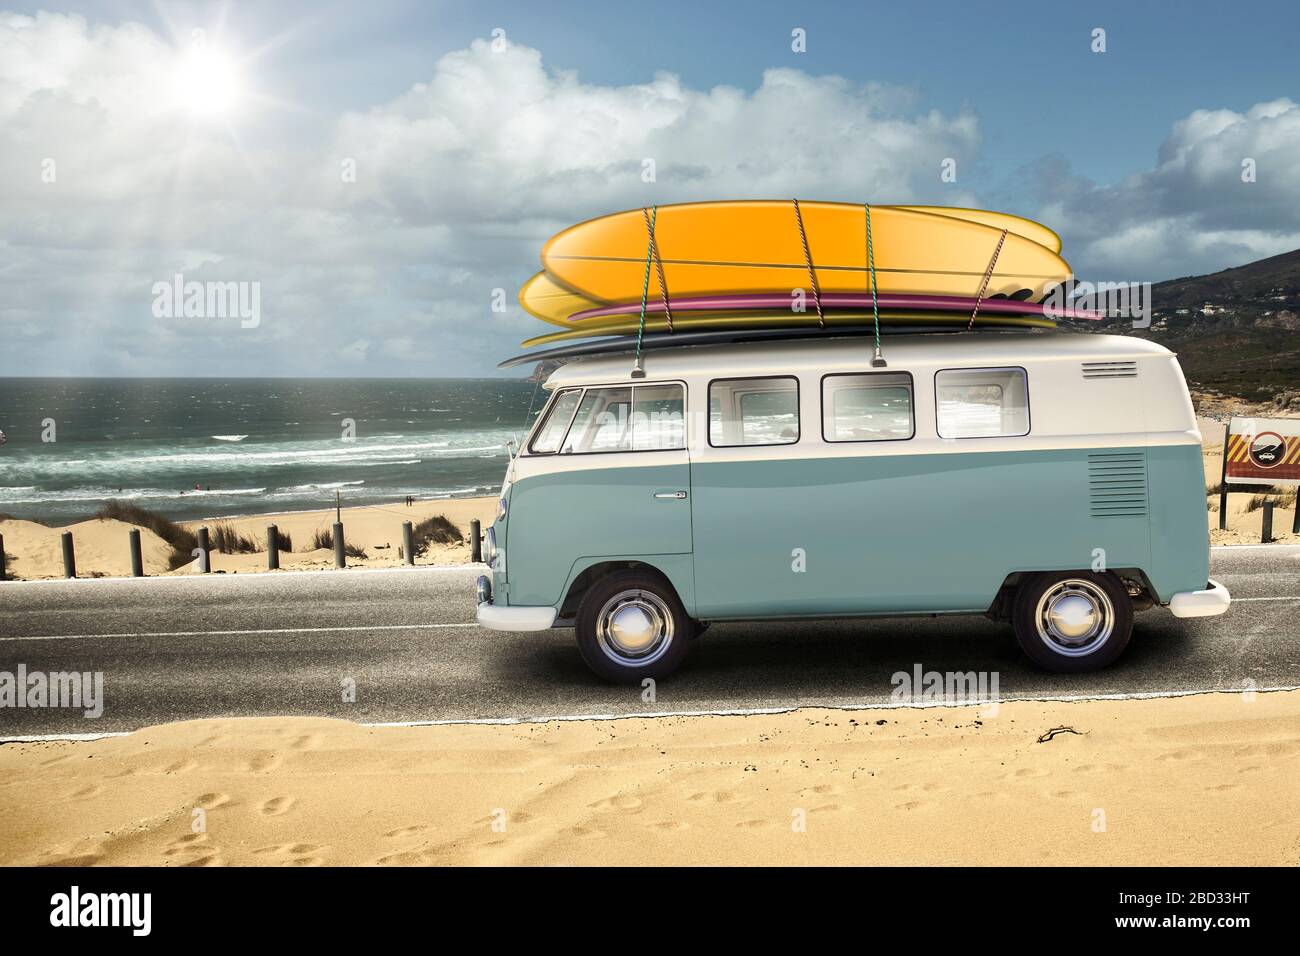 Classic Blue and white VW Camper Van parked on Seafront Promenade. Stock Photo